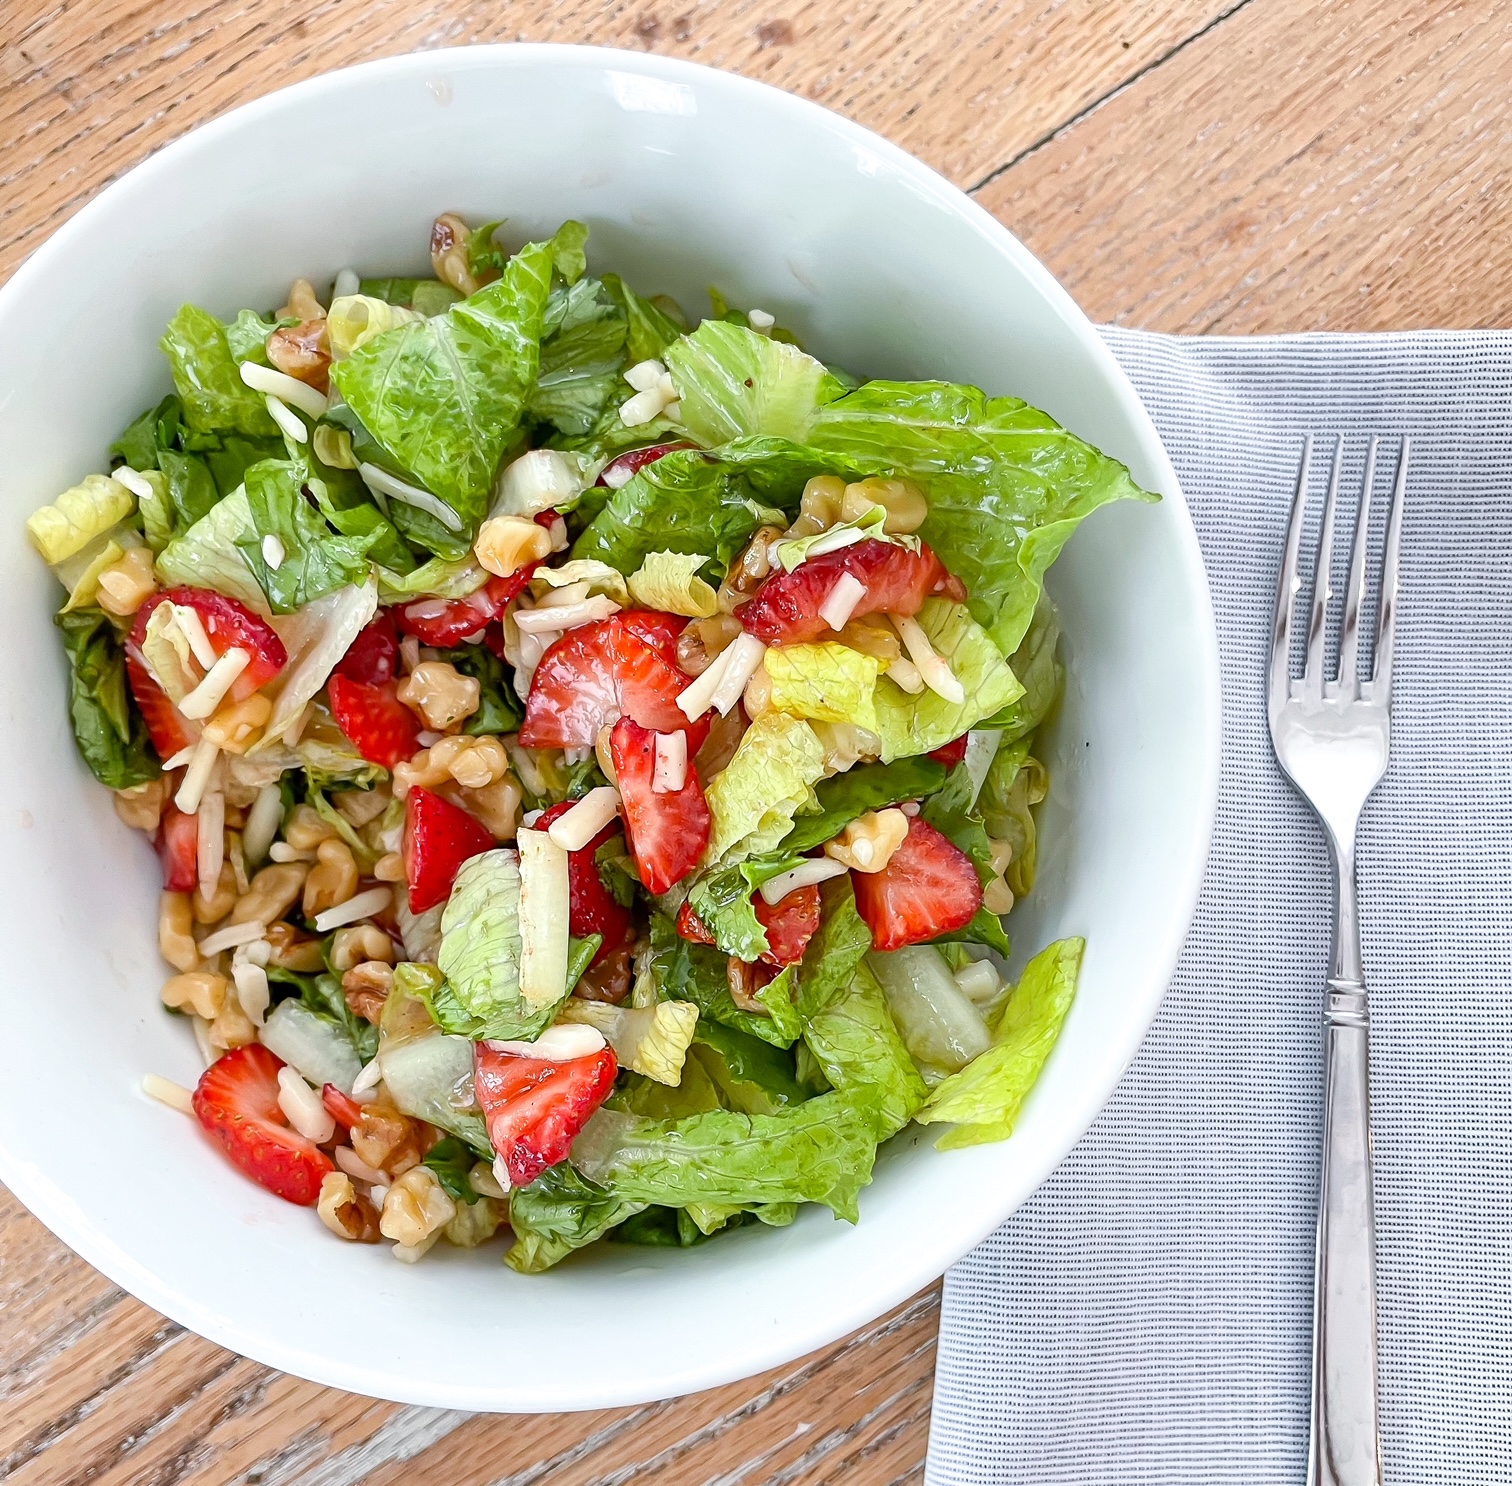 Easy Strawberry Salad with Walnuts - Duke Manor Farm by Laura Janning